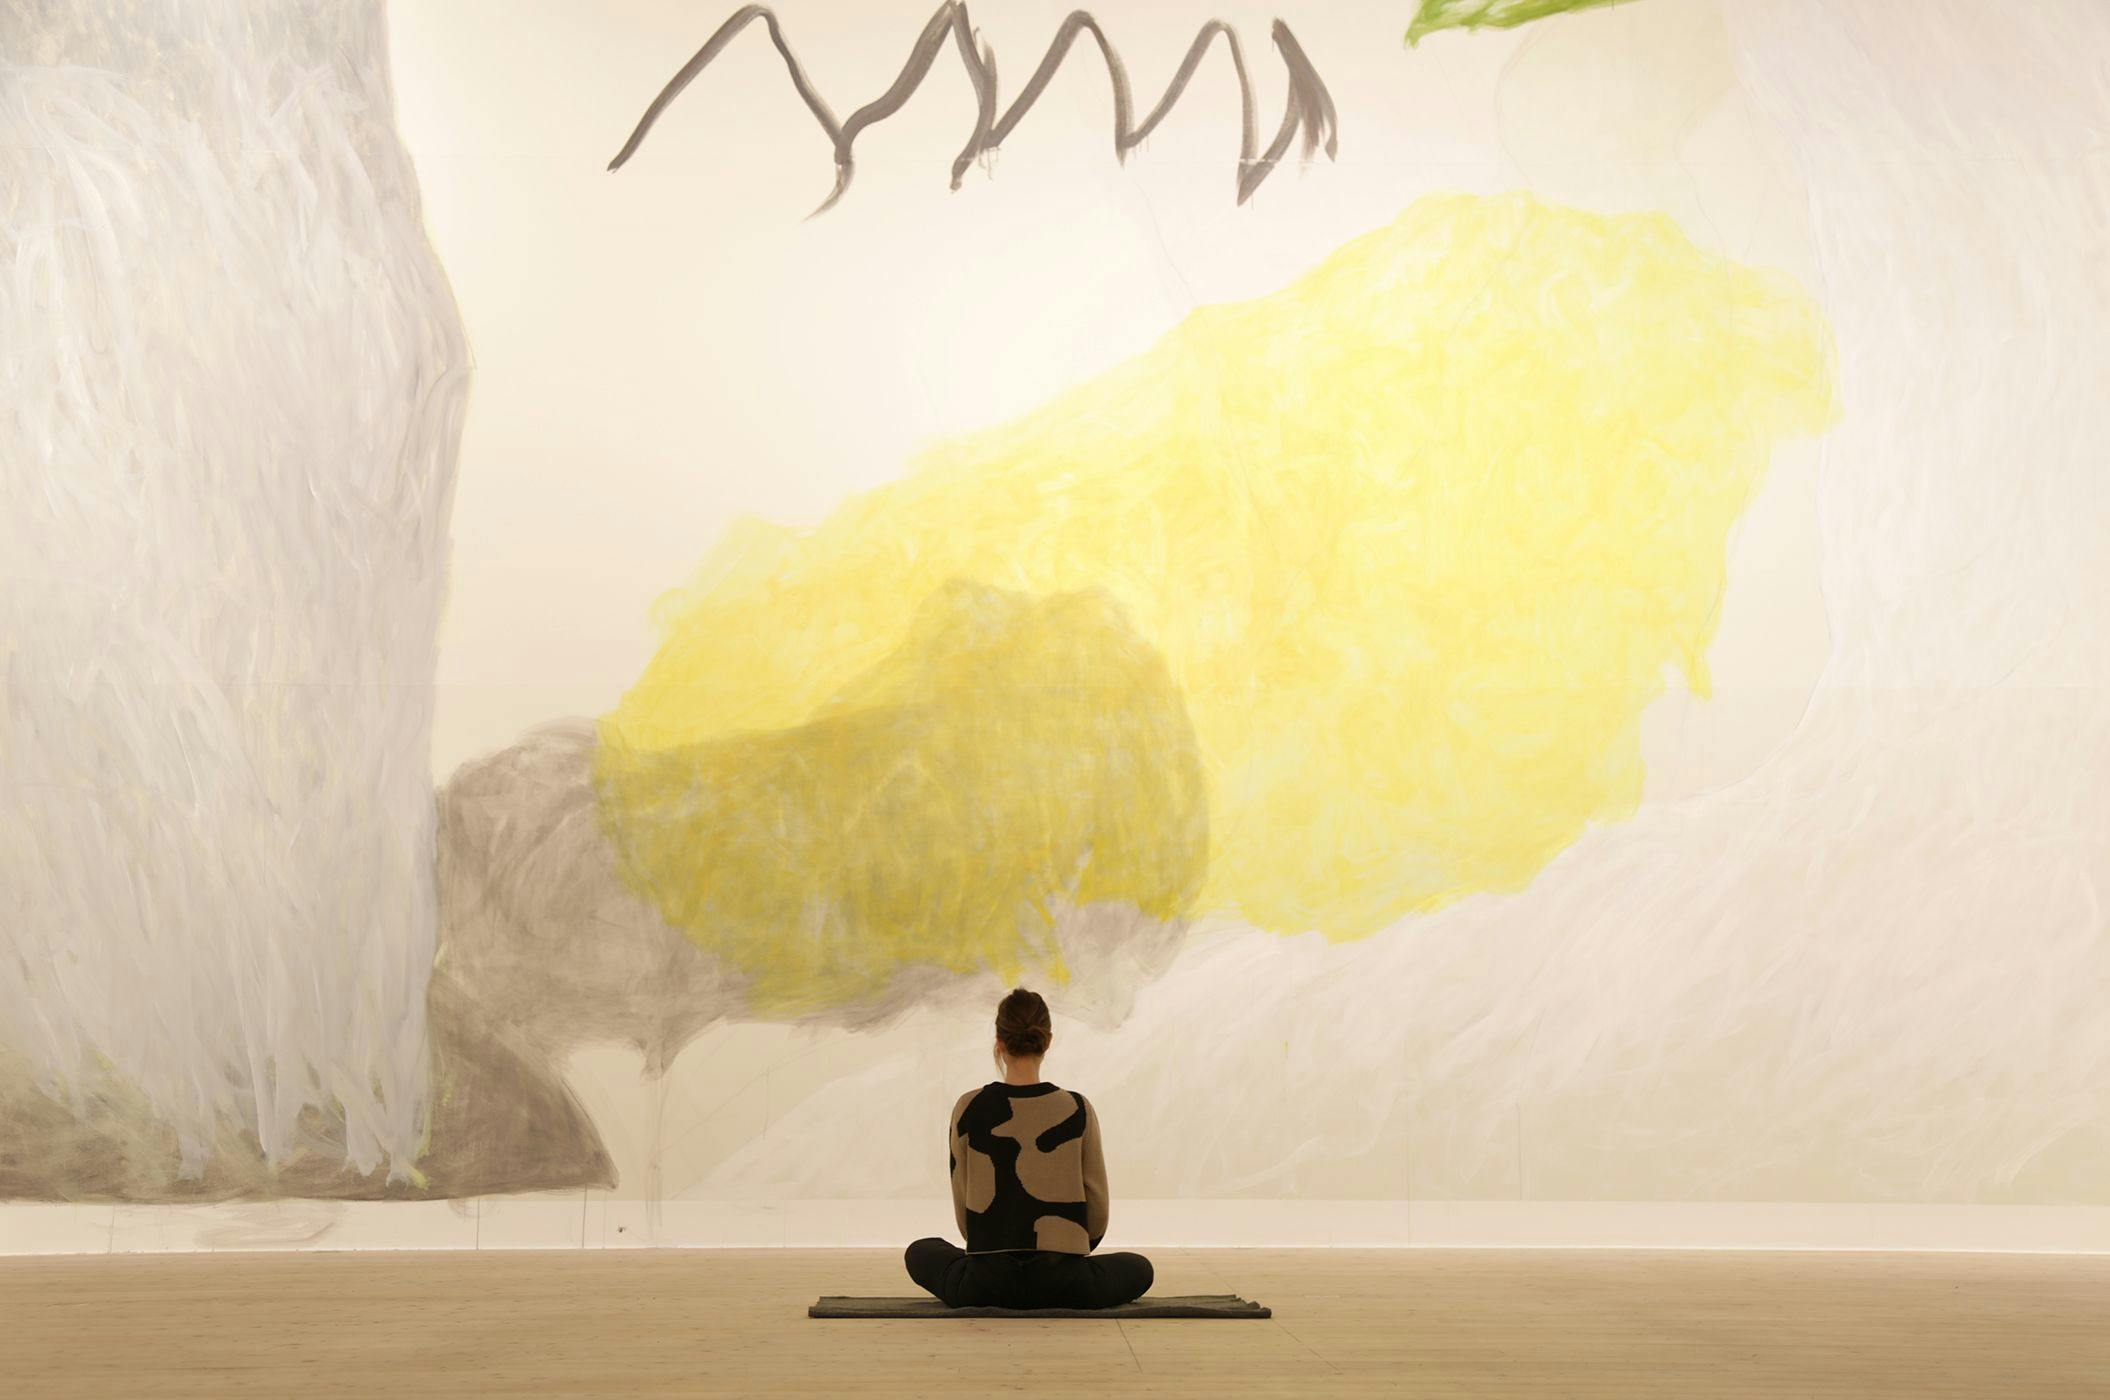 Person sits on the floor with back towards camera, in front of large mural in yellow and gray.